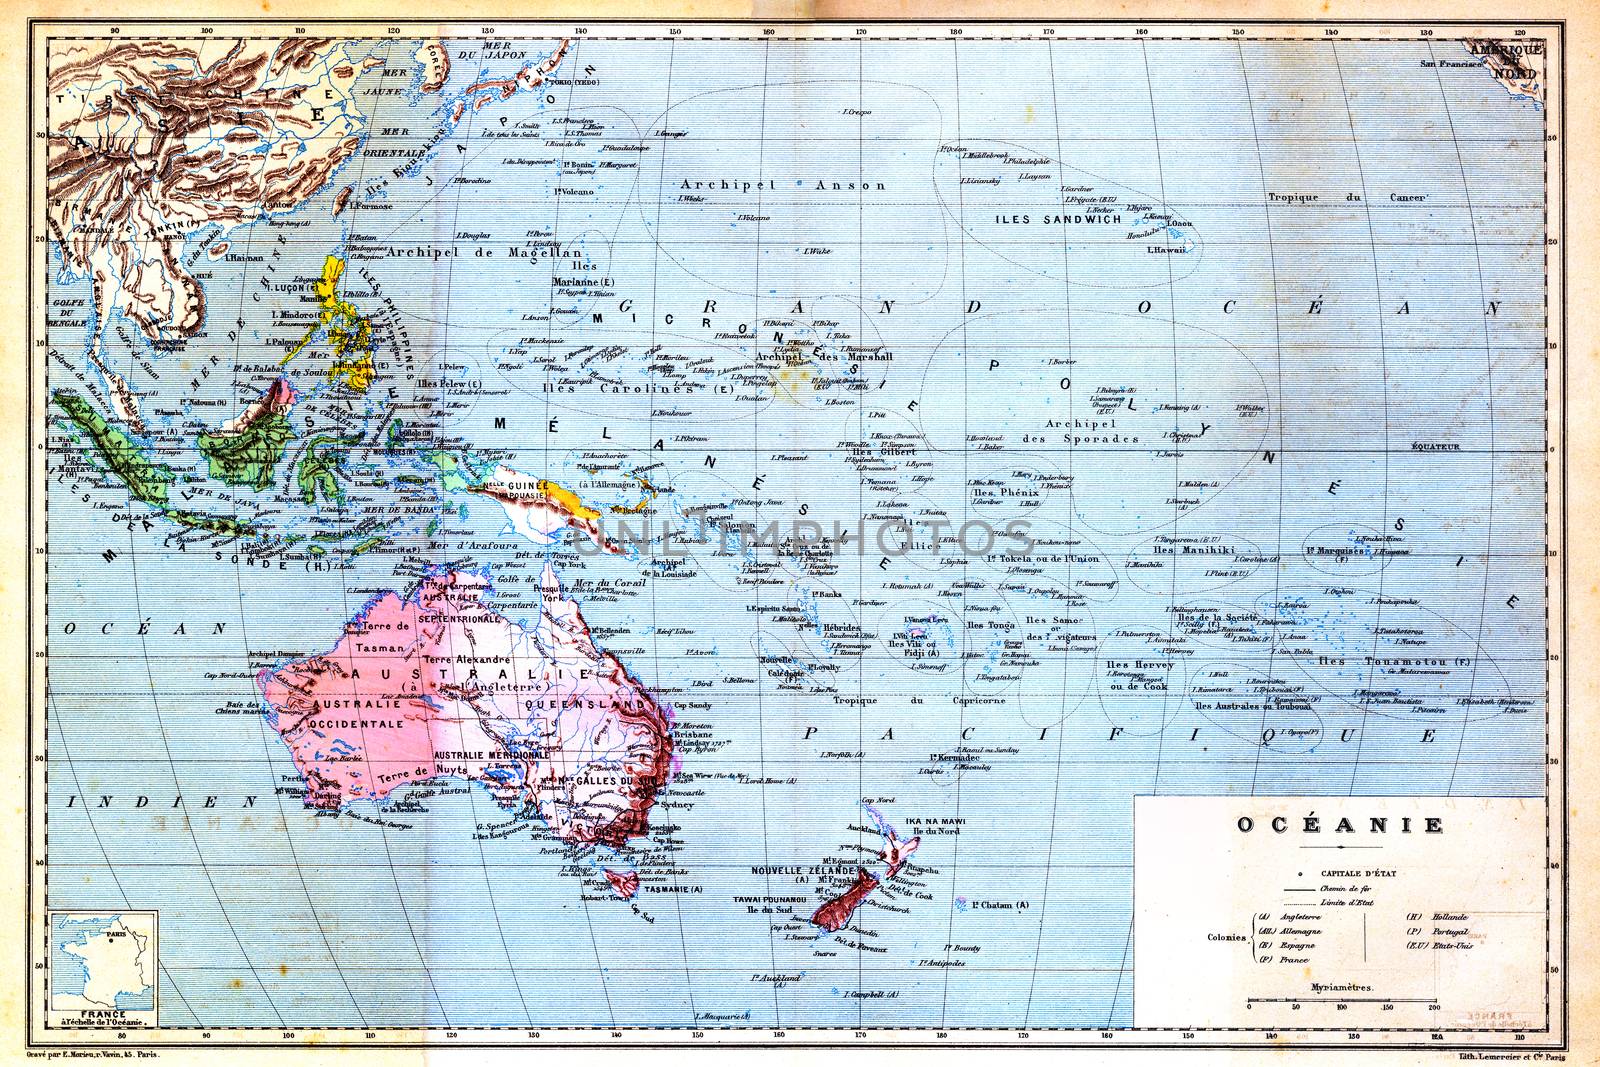 The colourful Map of Oceania with islands circled on the map.